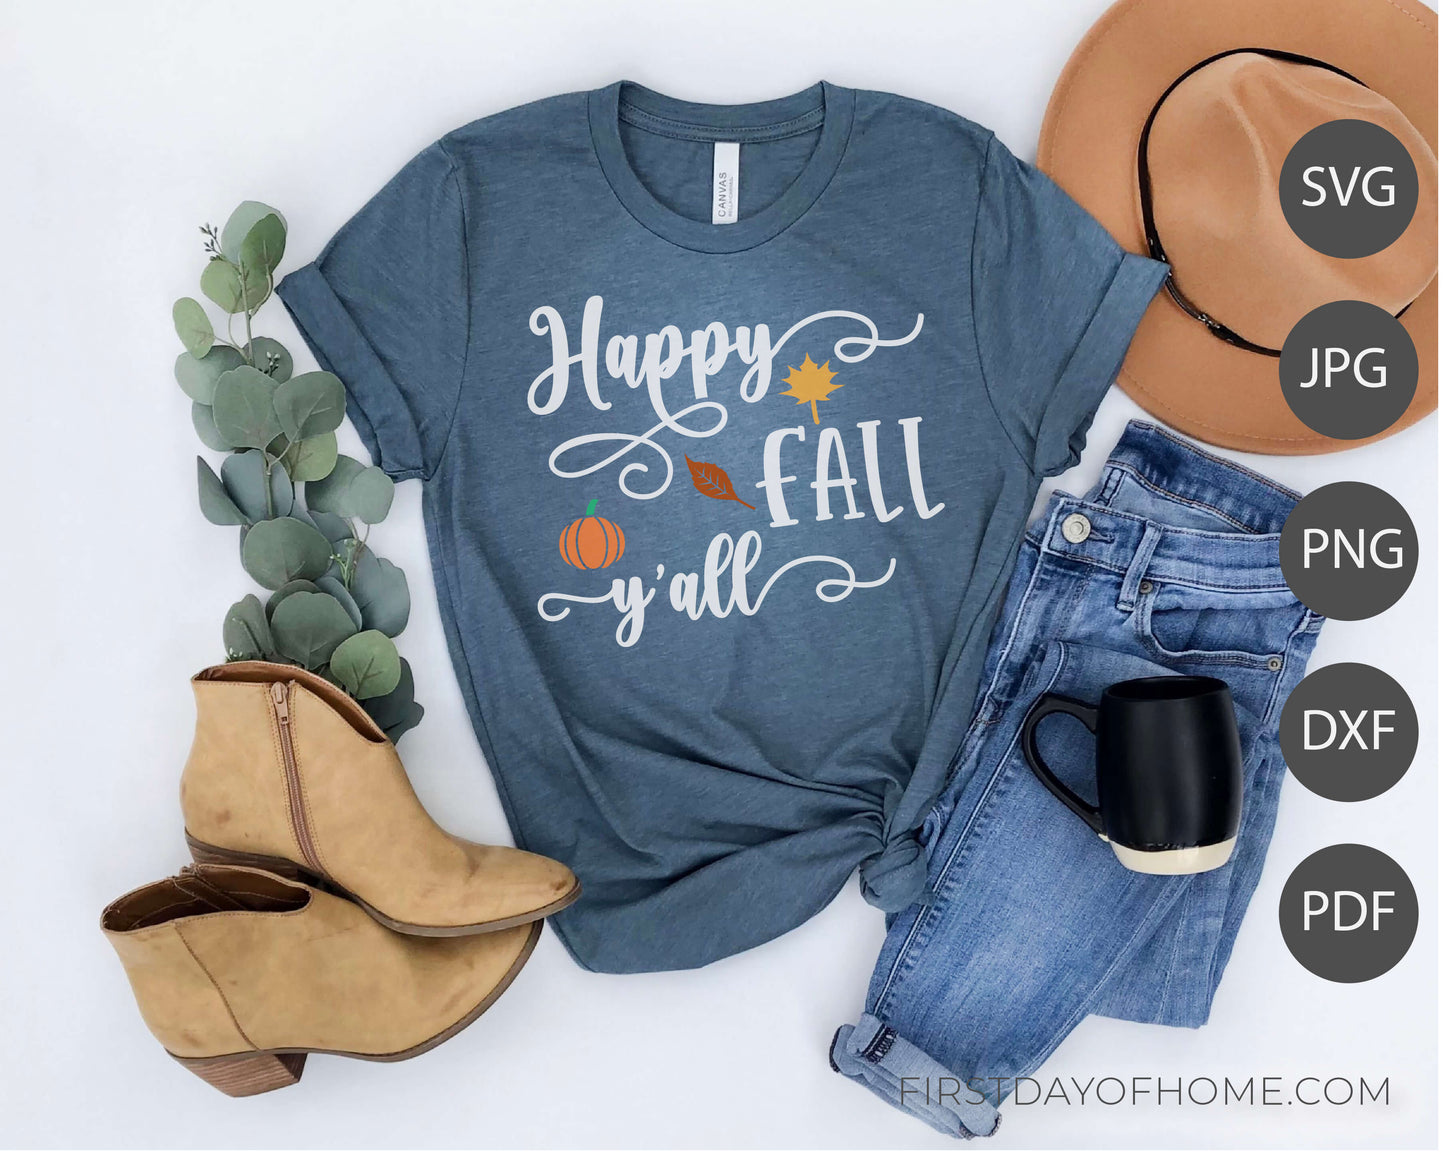 Mockup example of Happy Fall Y'all t-shirt using digital files. Lists digital files as SVG, JPG, PNG, DXF and PDF